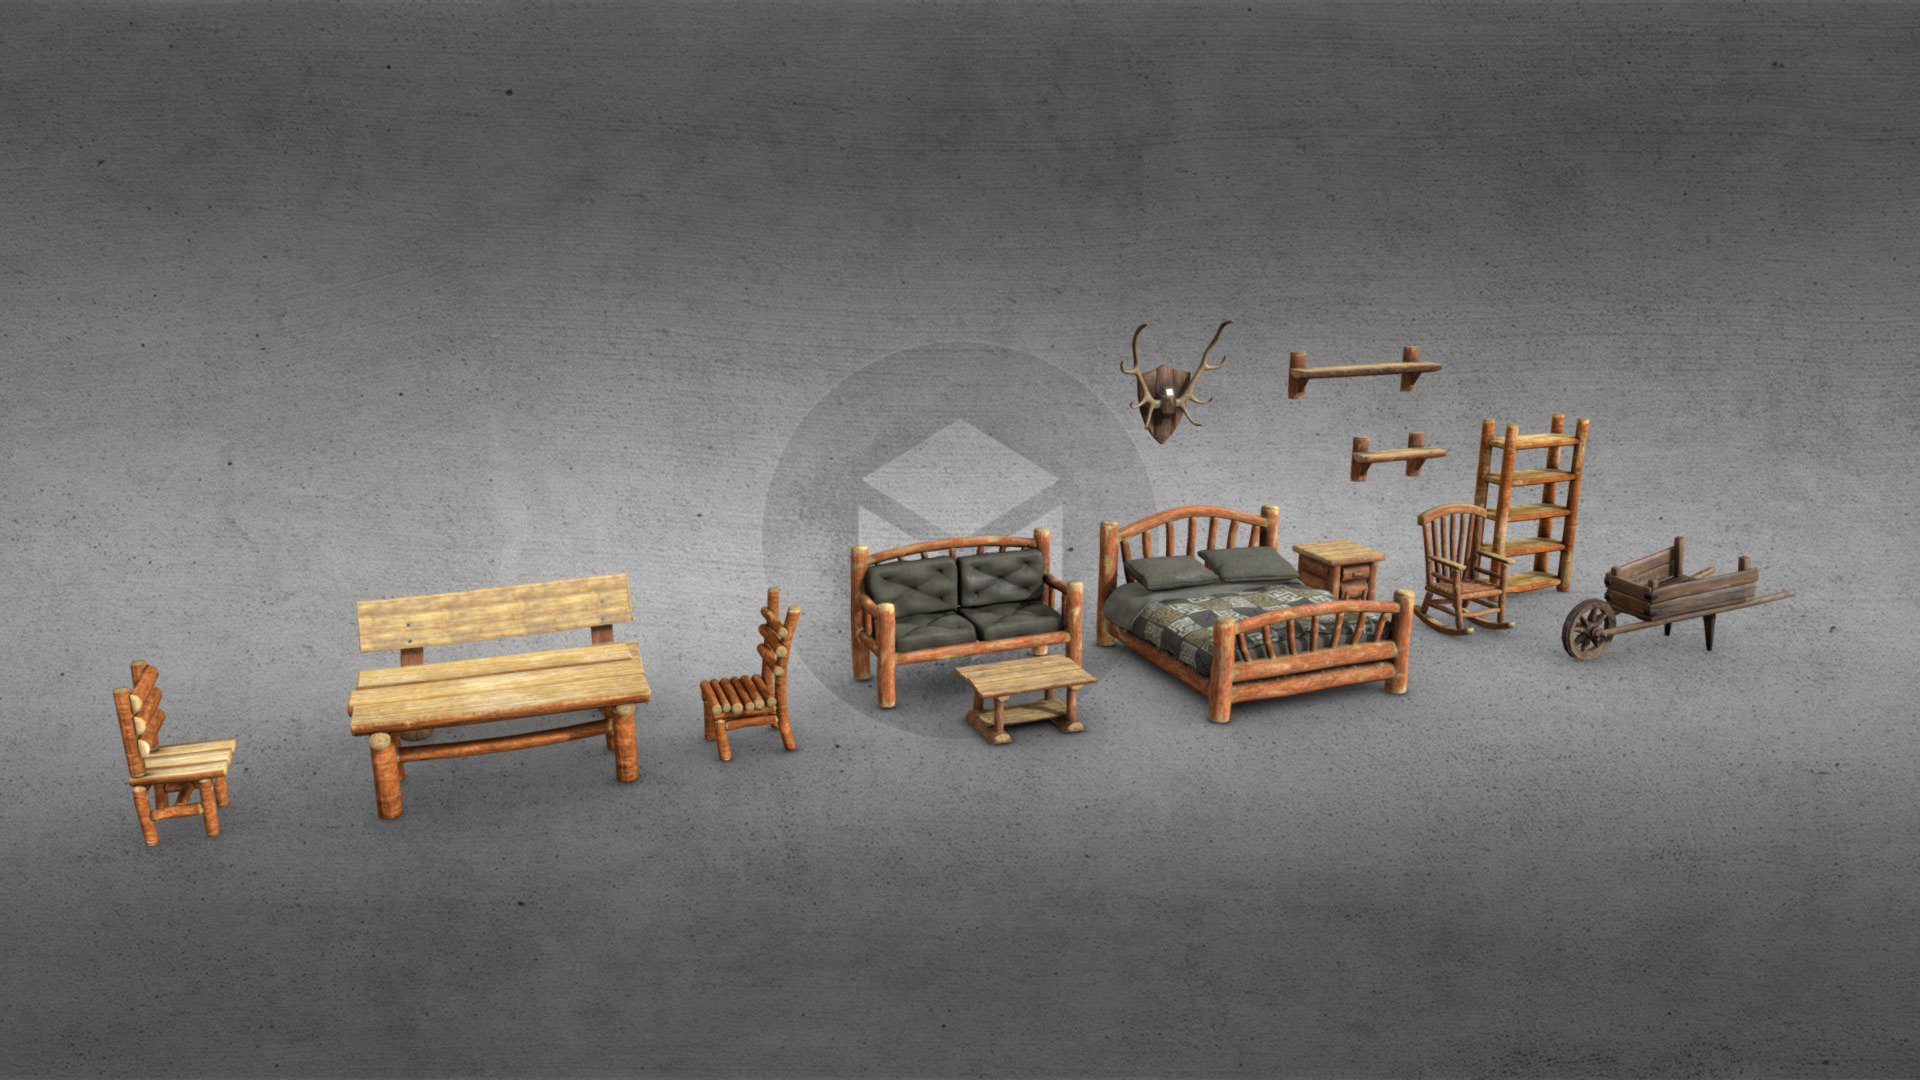 Introducing rustic log furniture set.

Includes:




Couch

Standing Shelves

Bed

Table

Bedside Table

Coffee Table

2 Wall Mounted Shelves

Bench

2 Pillows

2 Chairs

Rocking Chair

For support or other information please send us an e-mail at info@sunbox.games

Check out our other work at sunbox.games - Rustic Log Furniture - Table Couch Bed Chair - Buy Royalty Free 3D model by Sunbox Games (@sunboxgames) 3d model